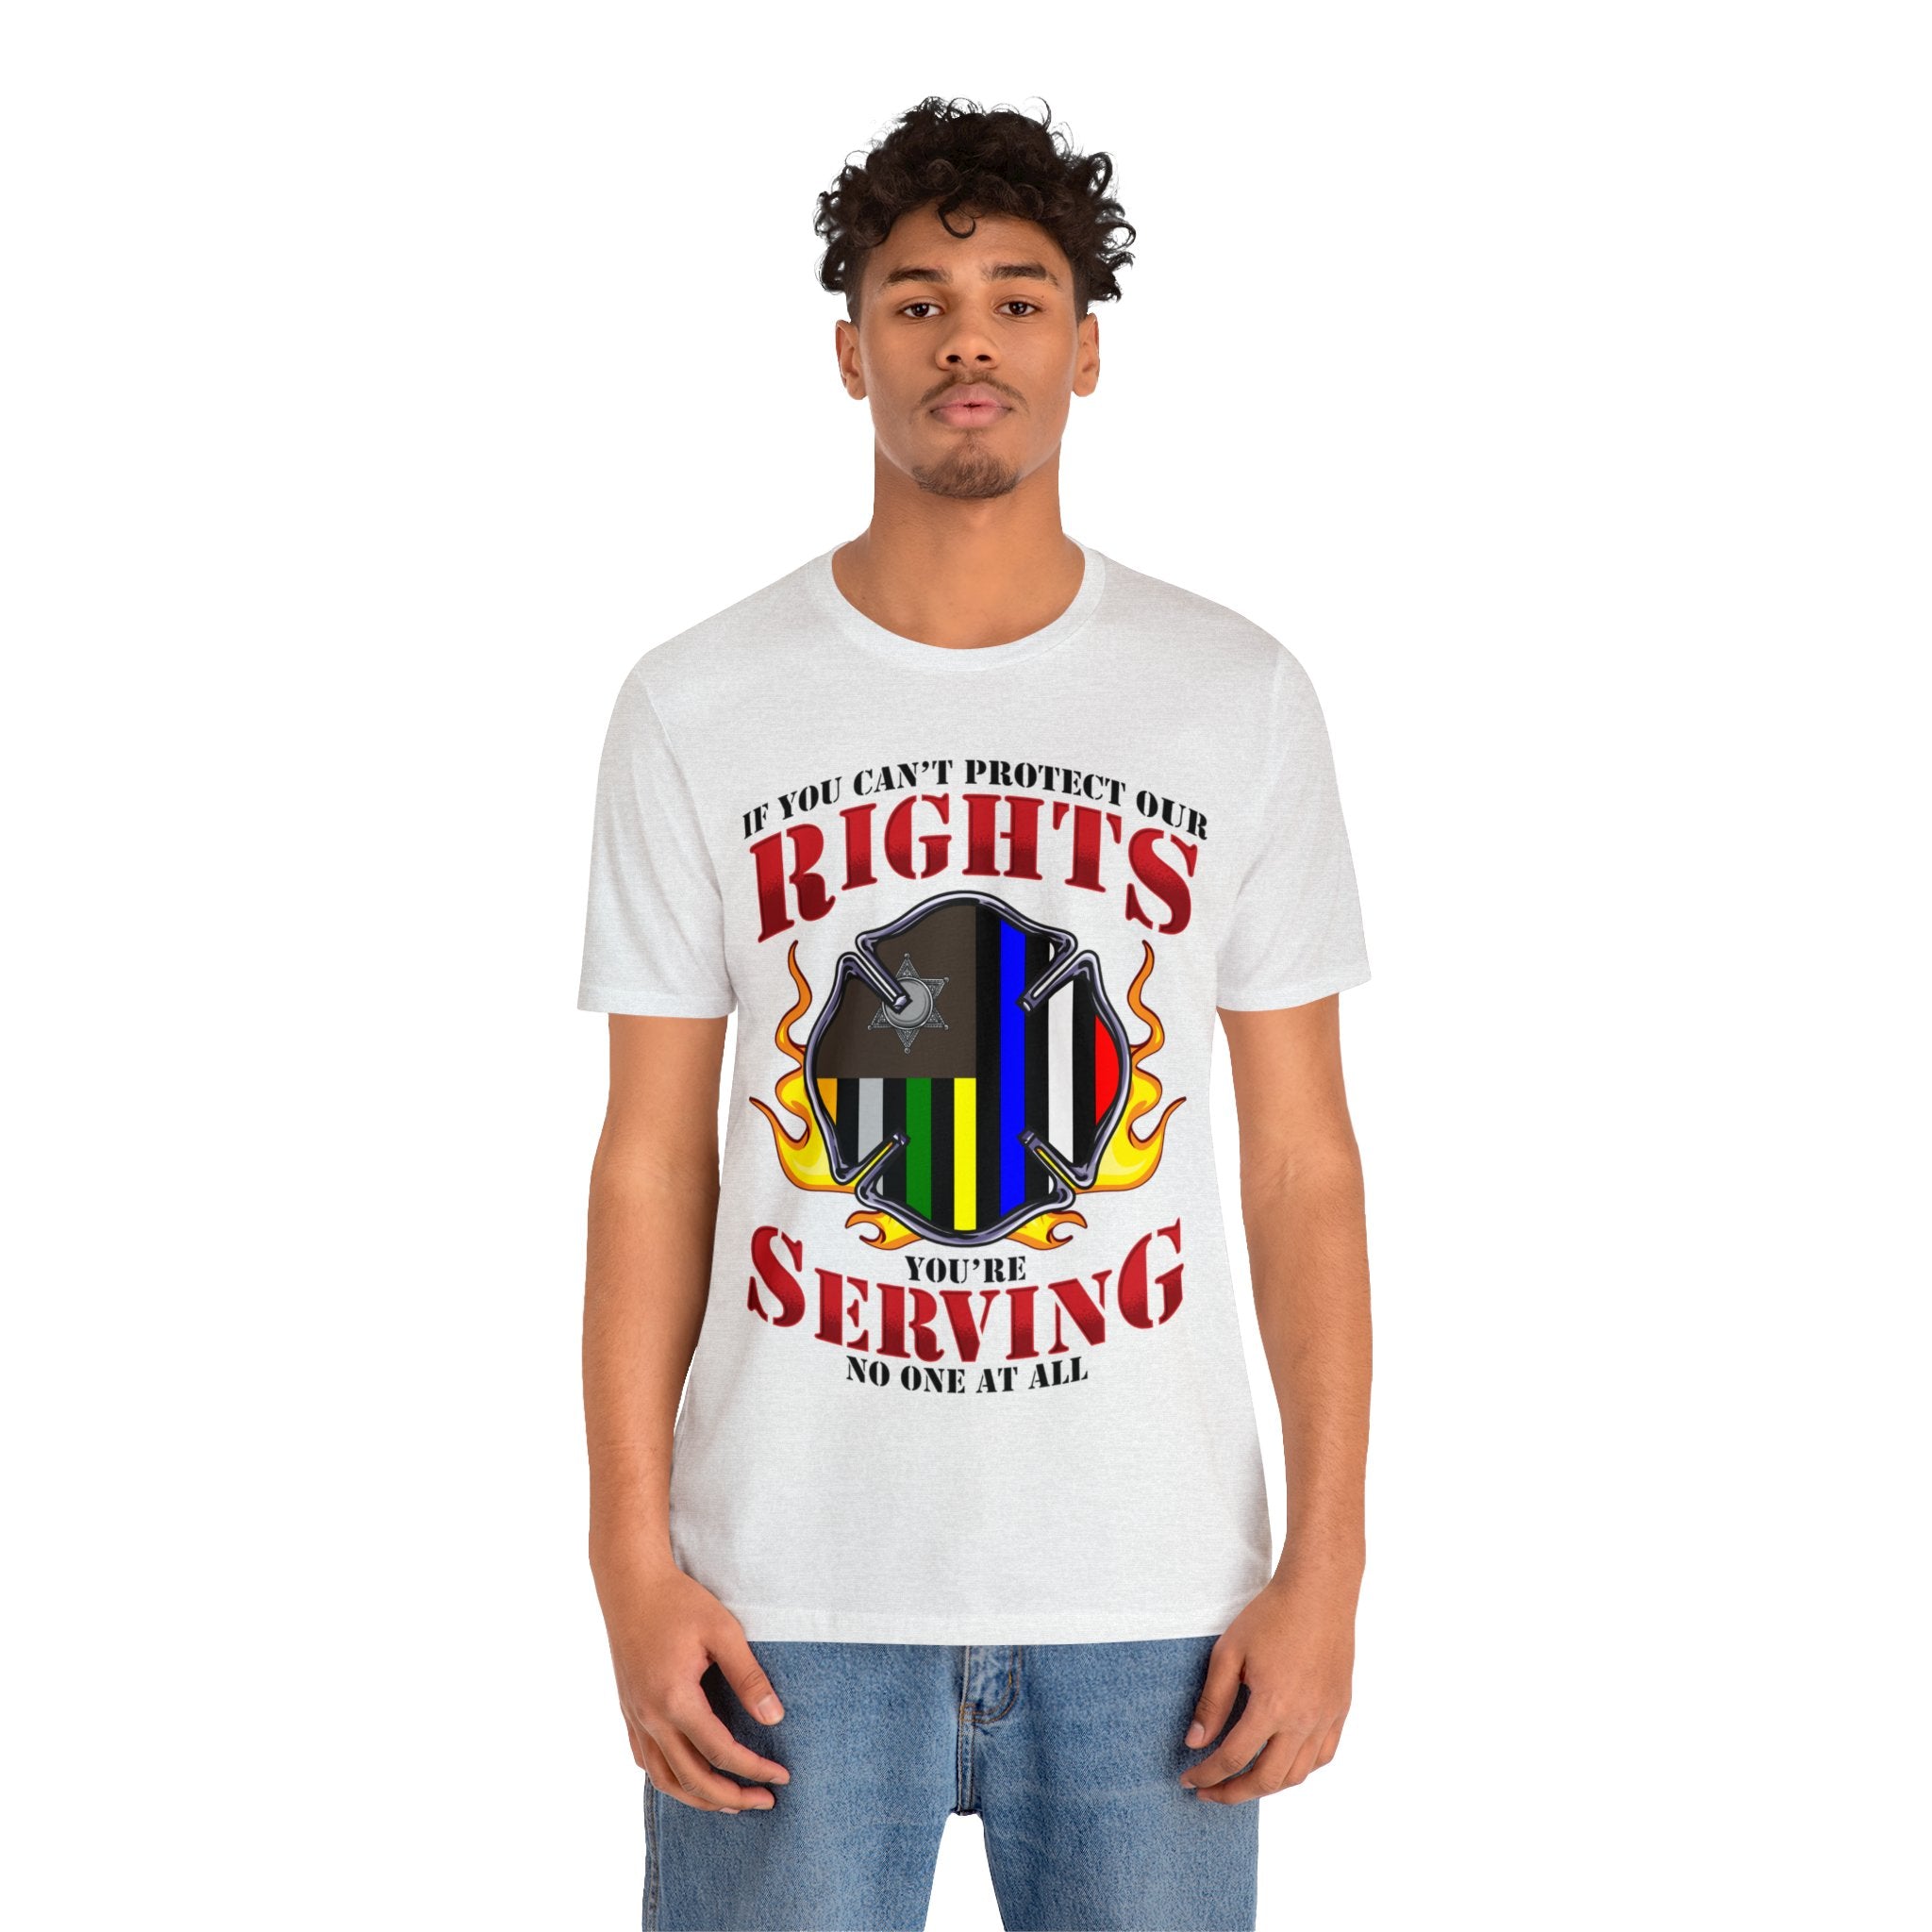 Thin Firefighter Line Tee - Rights/Serving